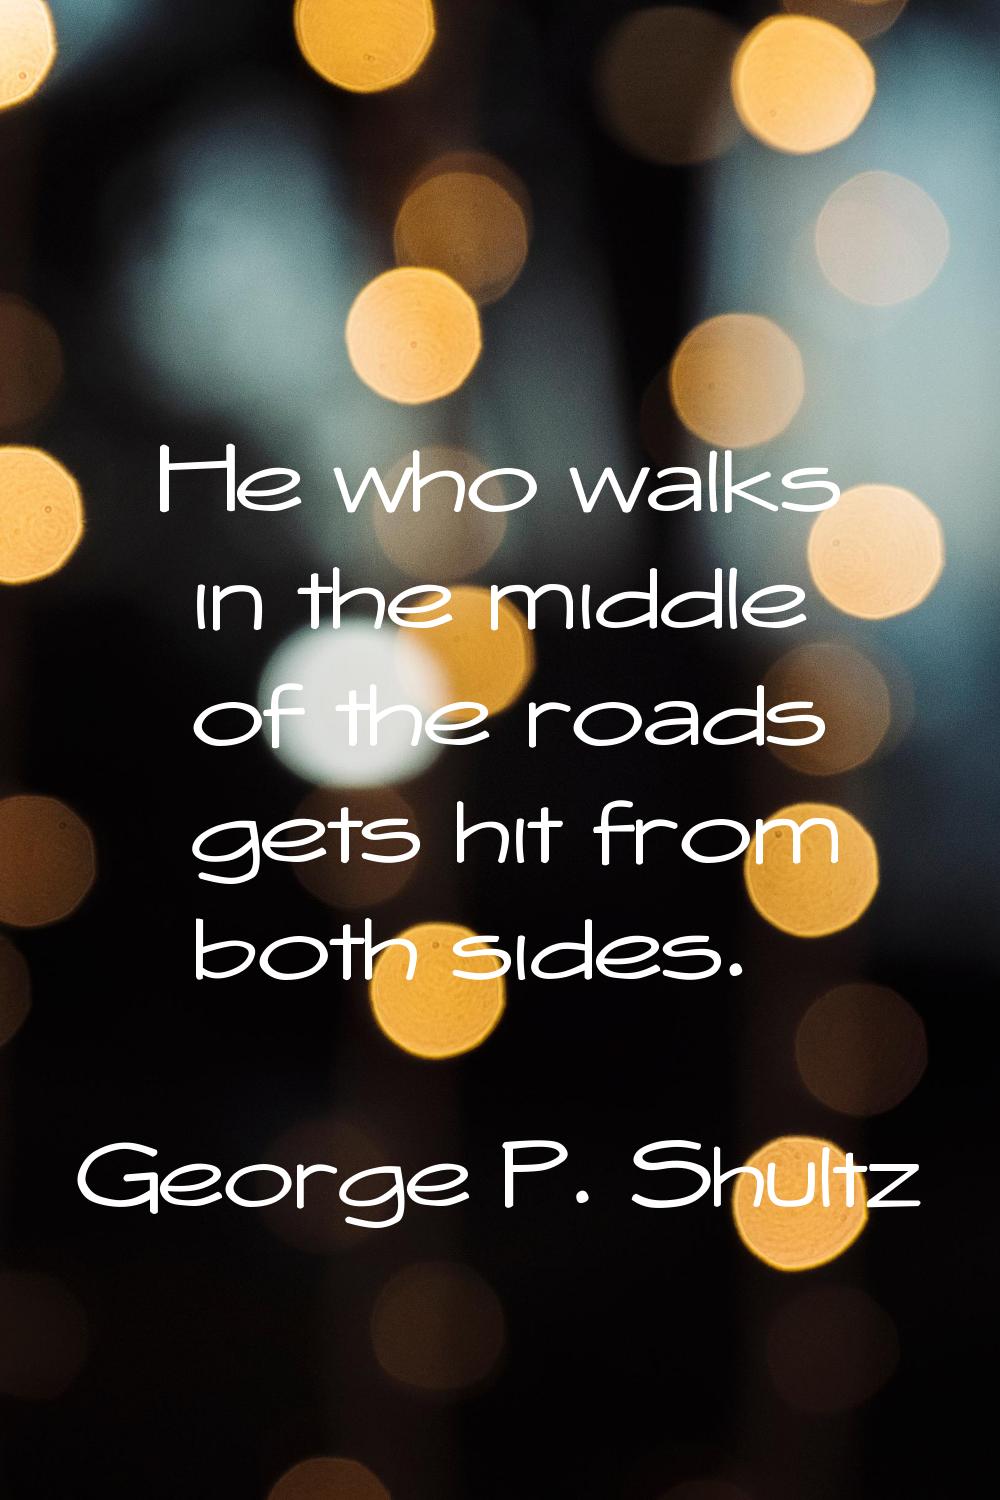 He who walks in the middle of the roads gets hit from both sides.